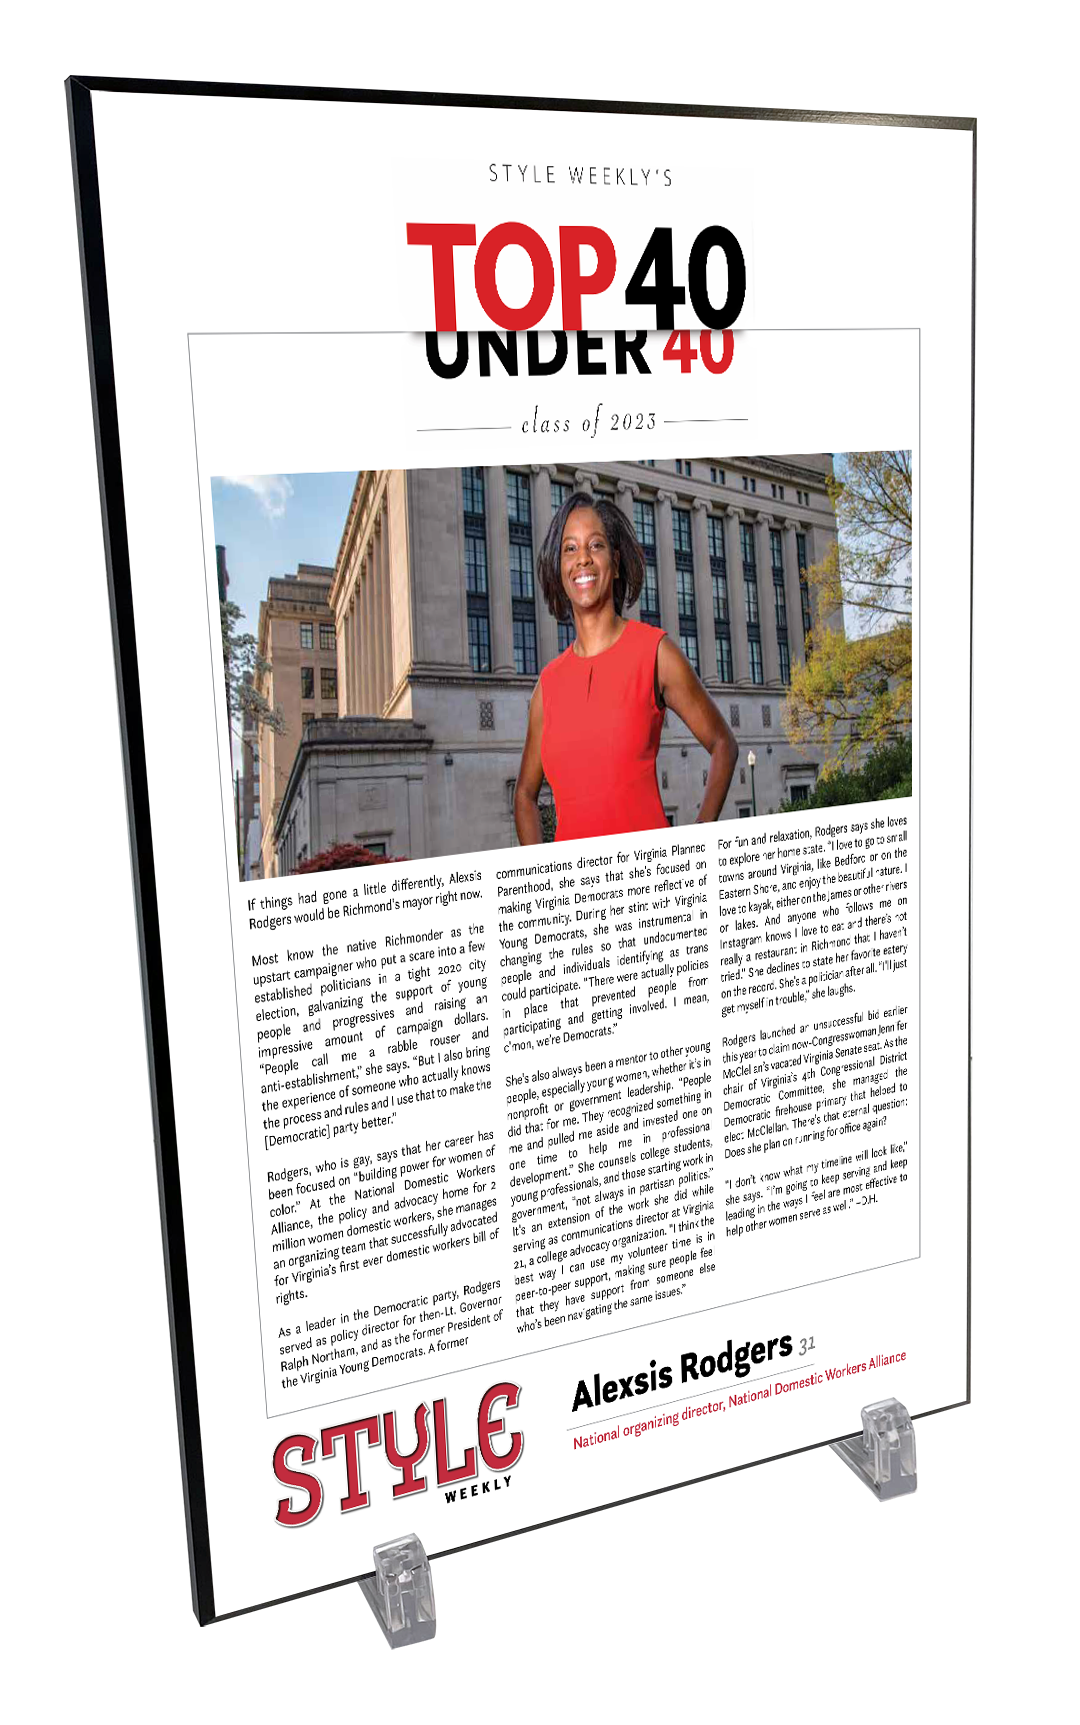 Style Weekly "Top 40 Under 40" Plaques